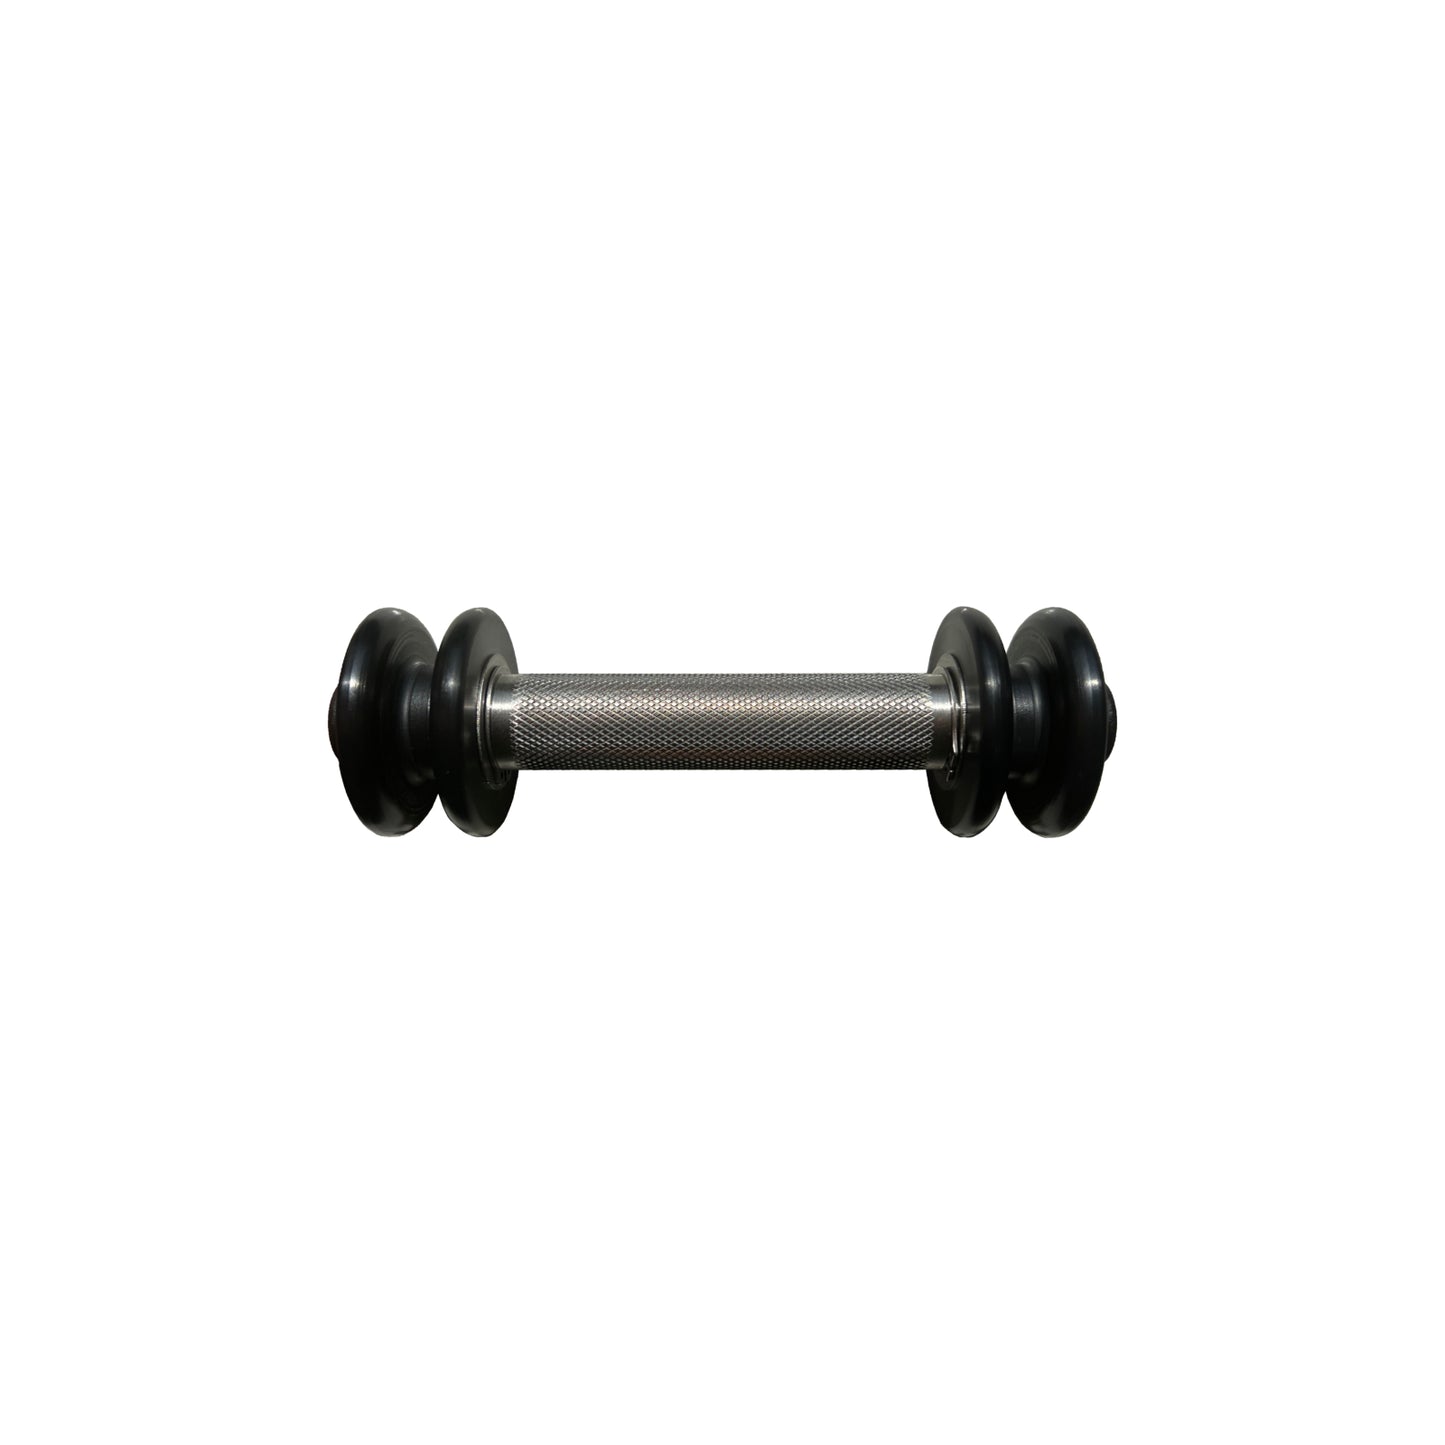 Picture of the T Handle. A steel bar with two black pulleys at the end. Features volcano knurling grip in the center.